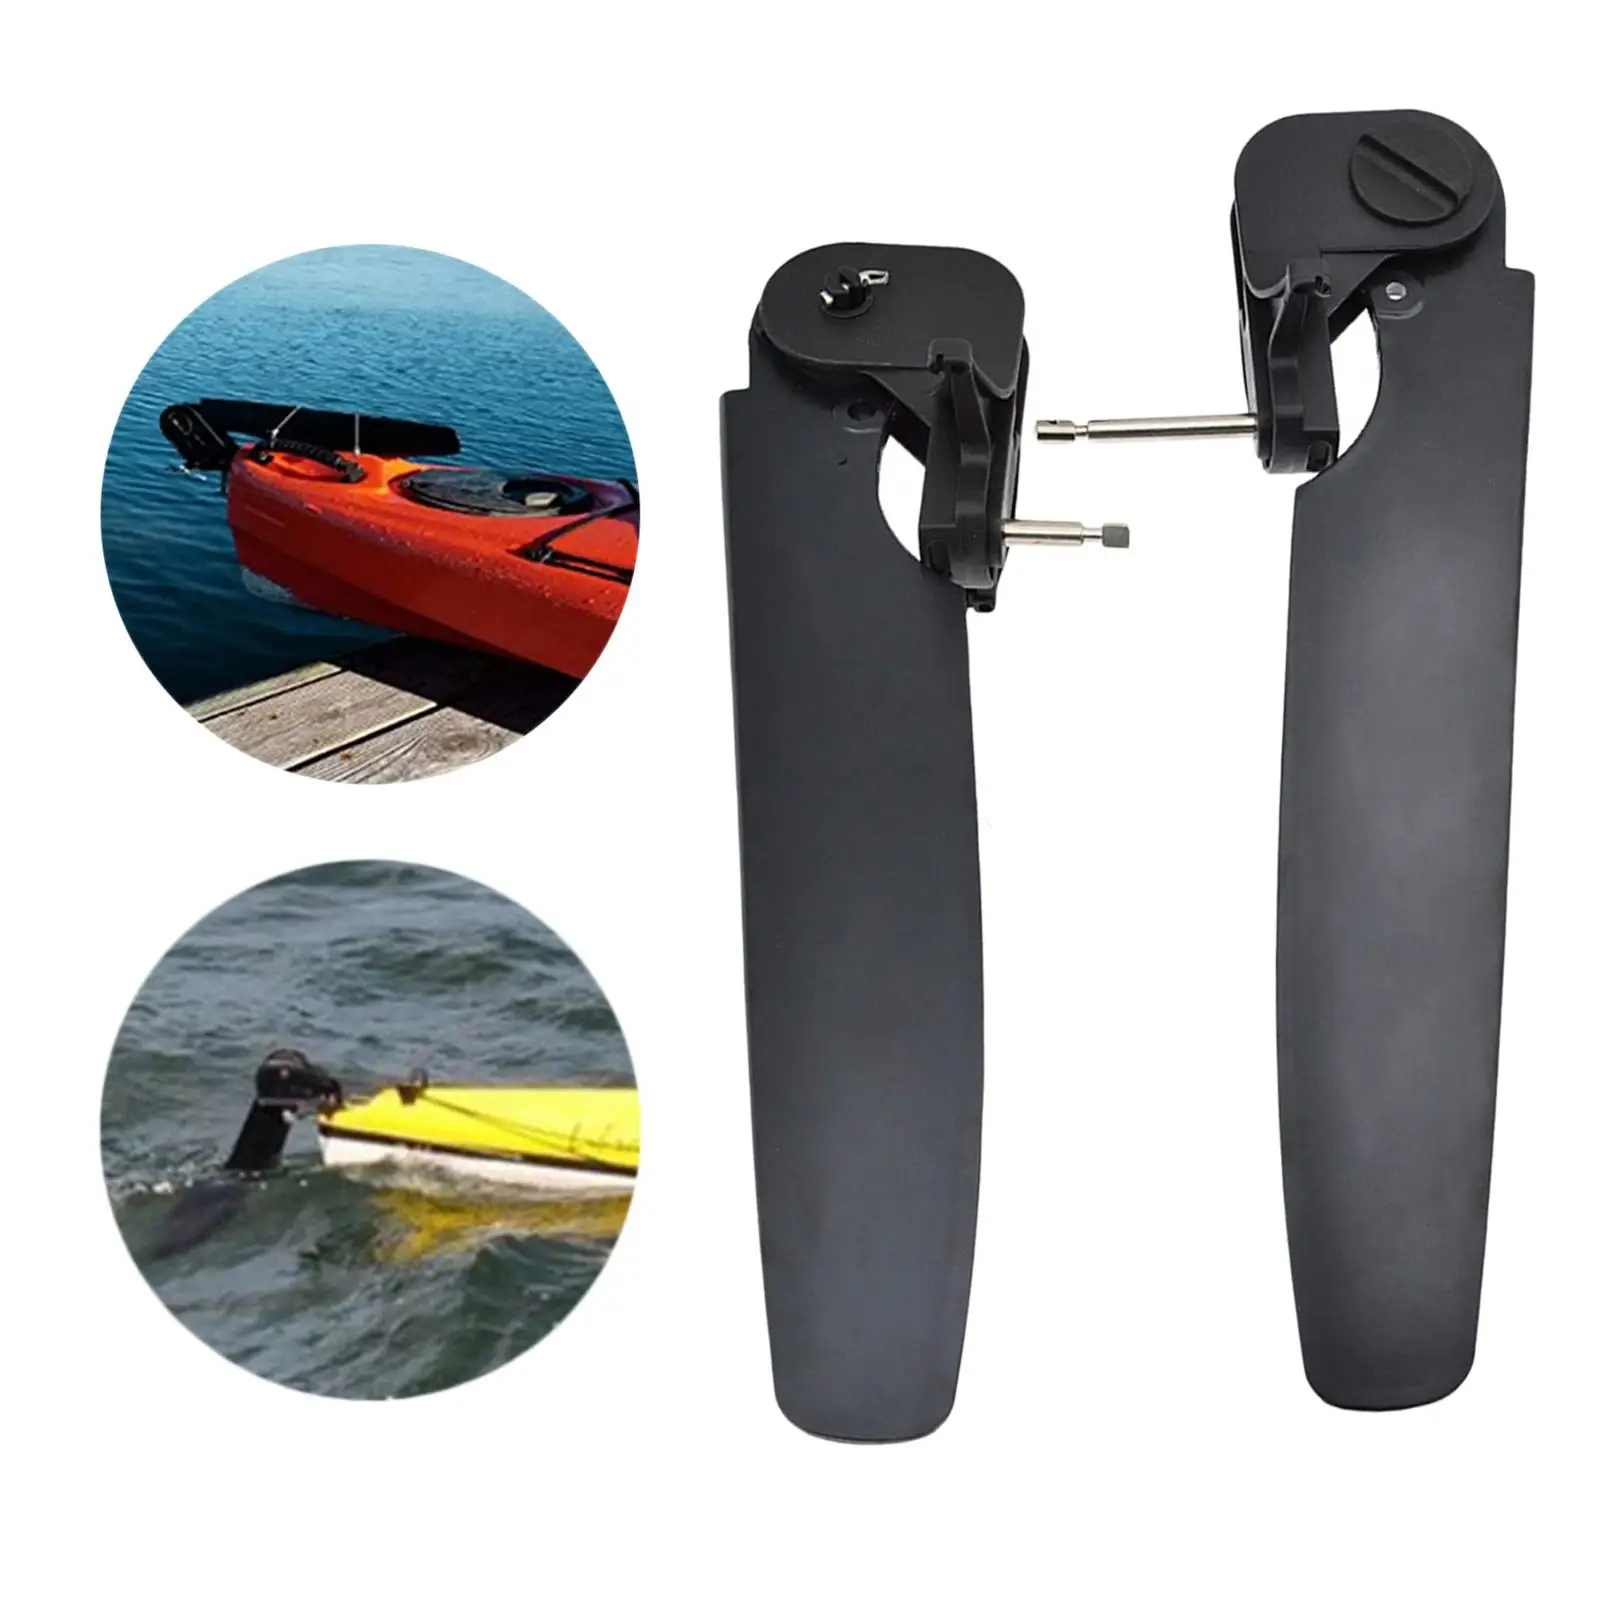 Kayak Boat Rudder Foot Control Switch Direction Accessroy Blade Black Steering System for Canoe Tail Watercraft Fishing Boat Sea